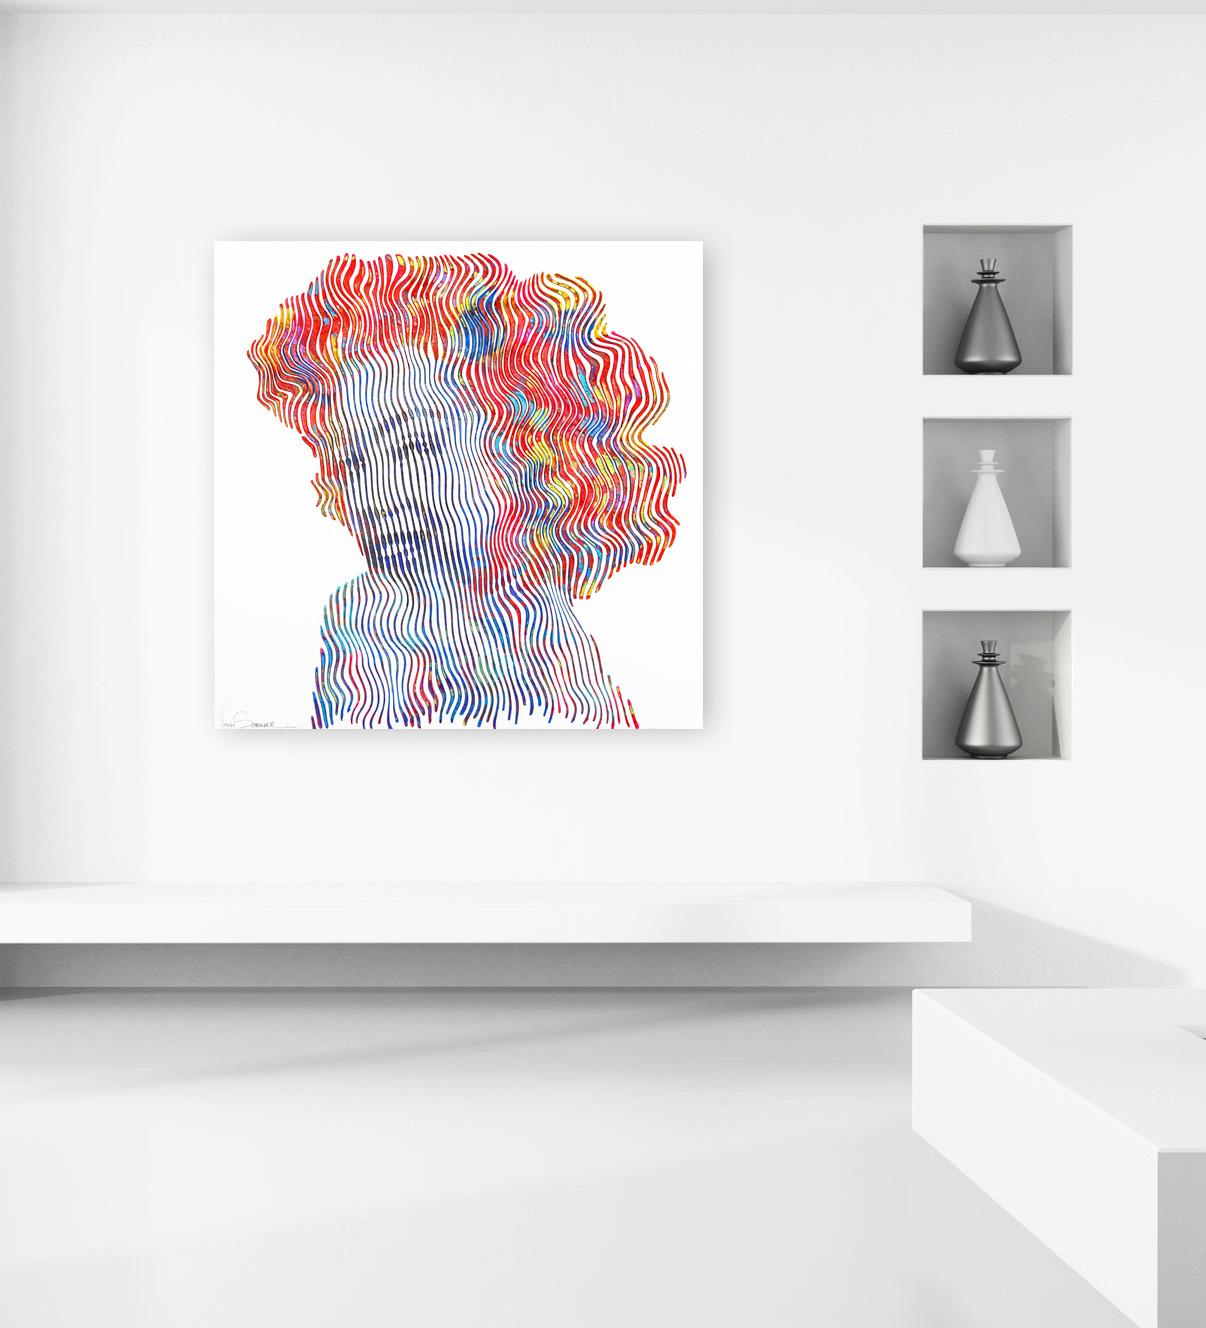 Marilyn Monroe The Smile Is Forever - Pop Art Painting by Virginie Schroeder